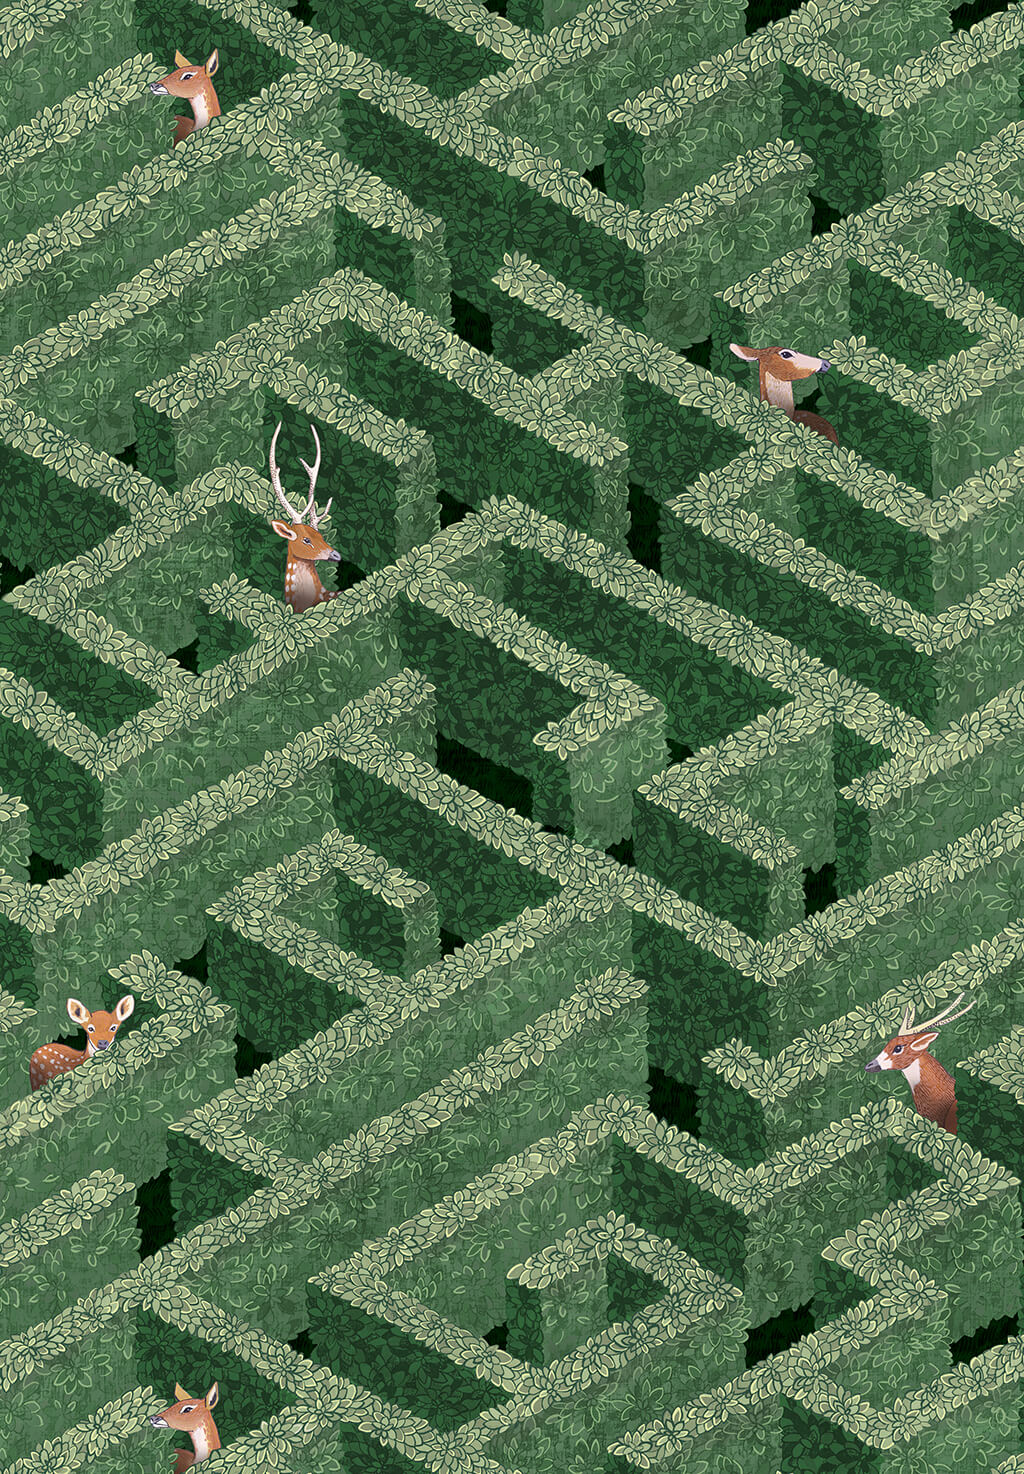 Labyrinth with Deer Wallpaper - Green